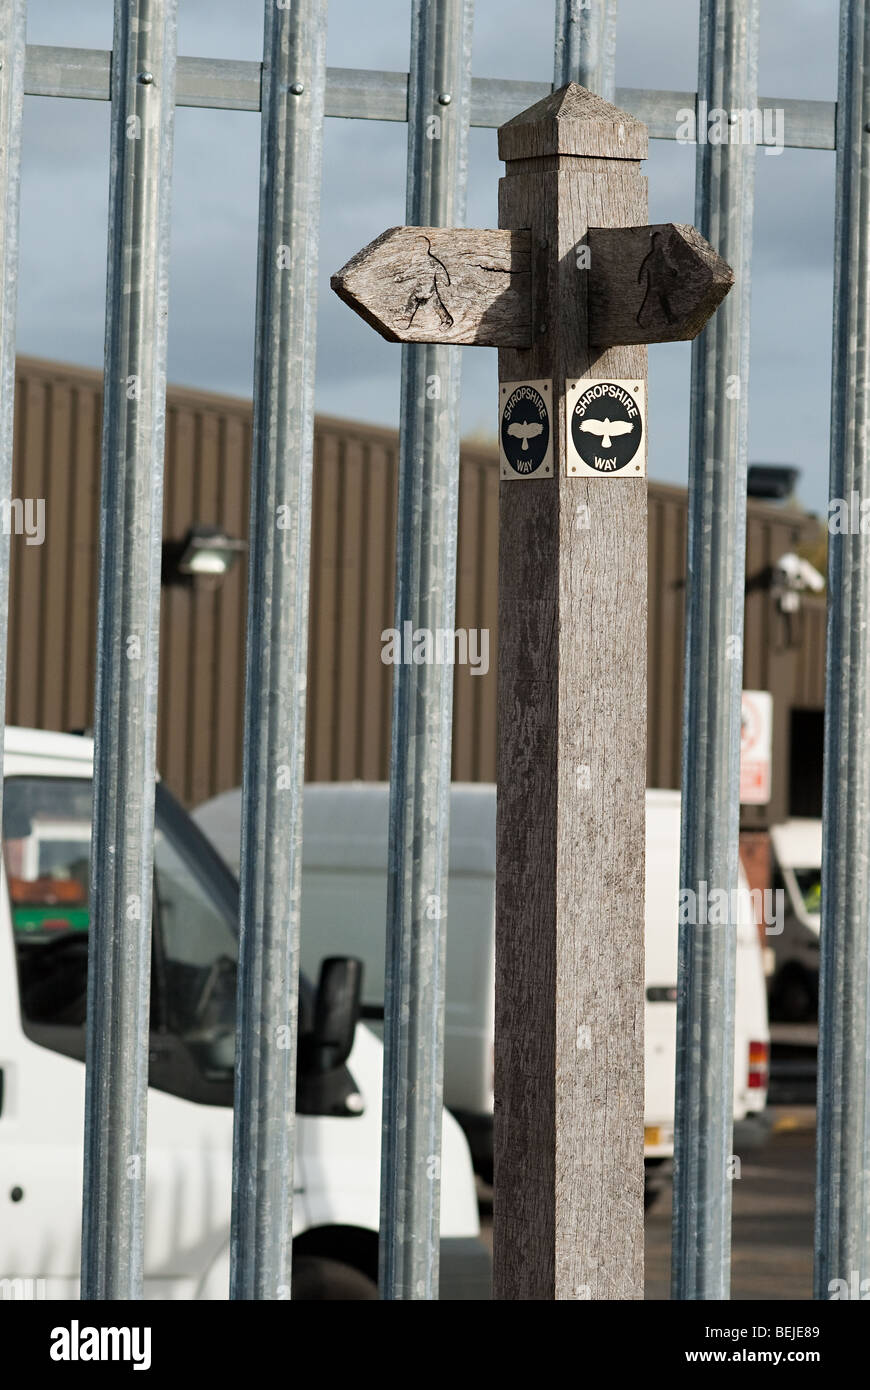 Public right of way sign in front of tall fence Stock Photo